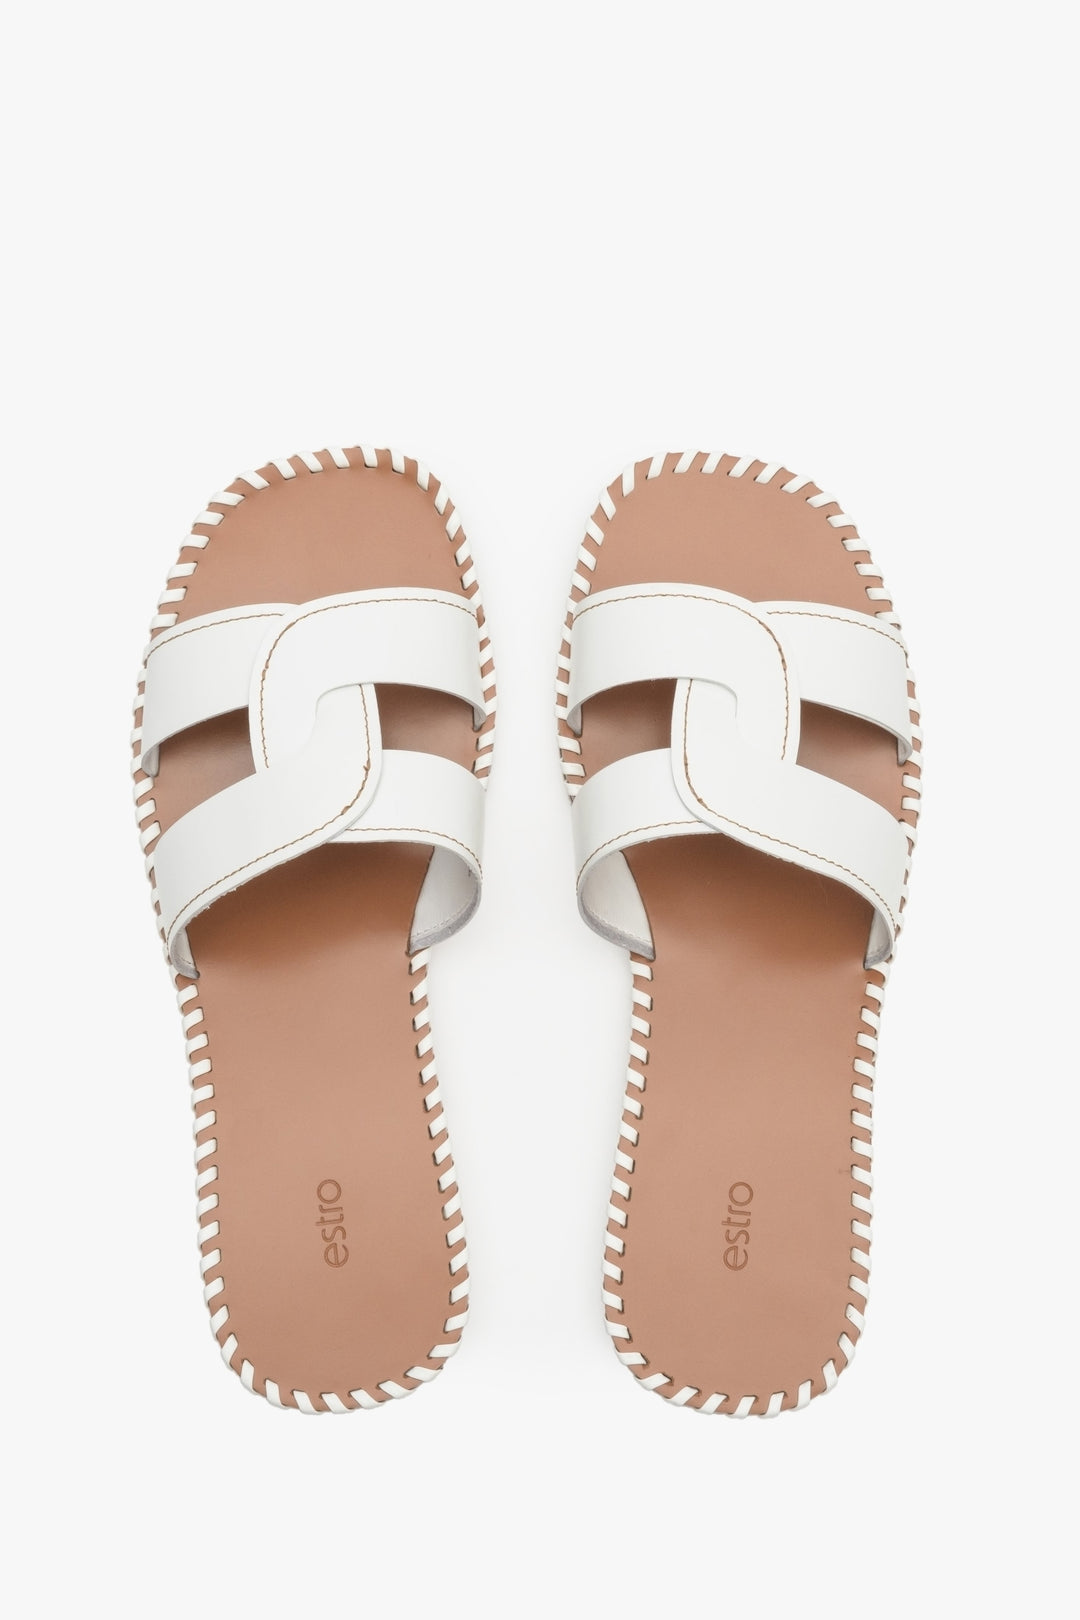 Women's white slide sandals made of genuine leather, Estro brand - presentation from above.